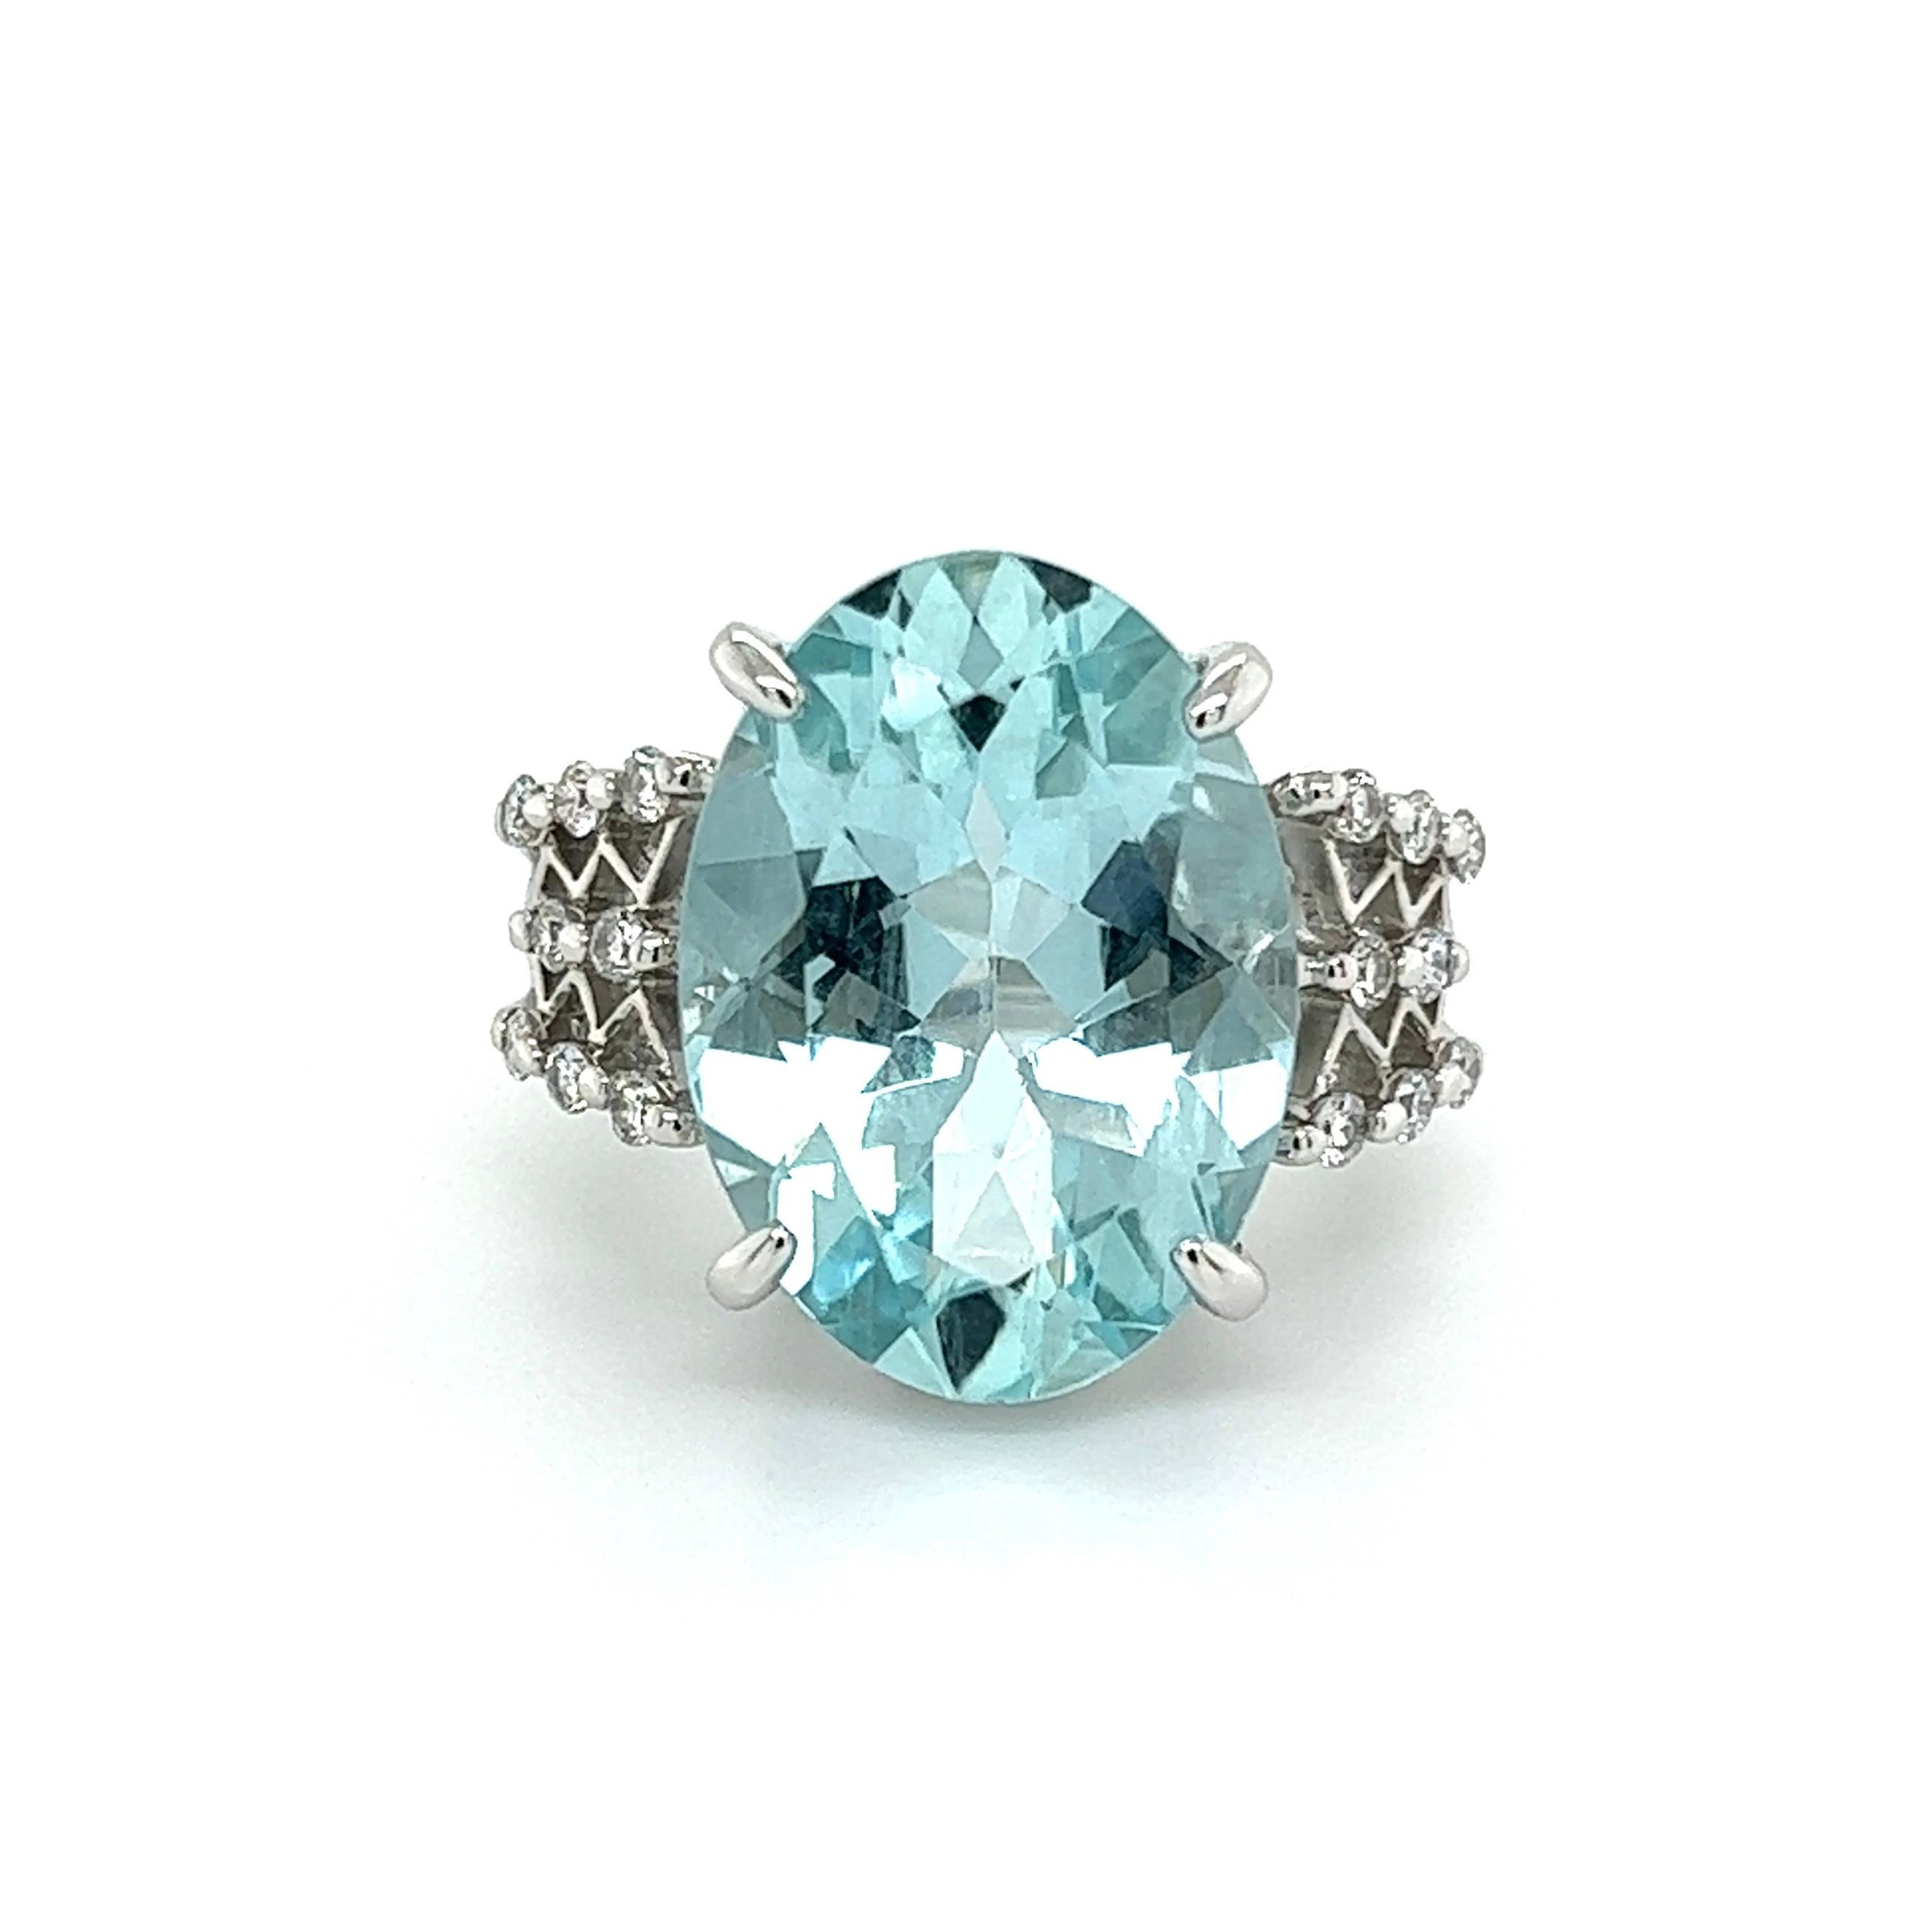 Simply Beautiful! Finely detailed Aquamarine and Diamond Platinum Cocktail Ring. Centering a securely nestled Oval Aquamarine, weighing approx. 10.21 Carats either side set with Diamonds, approx. 0.32tcw. Approx. dimensions: 1.06” l x 0.87” w x